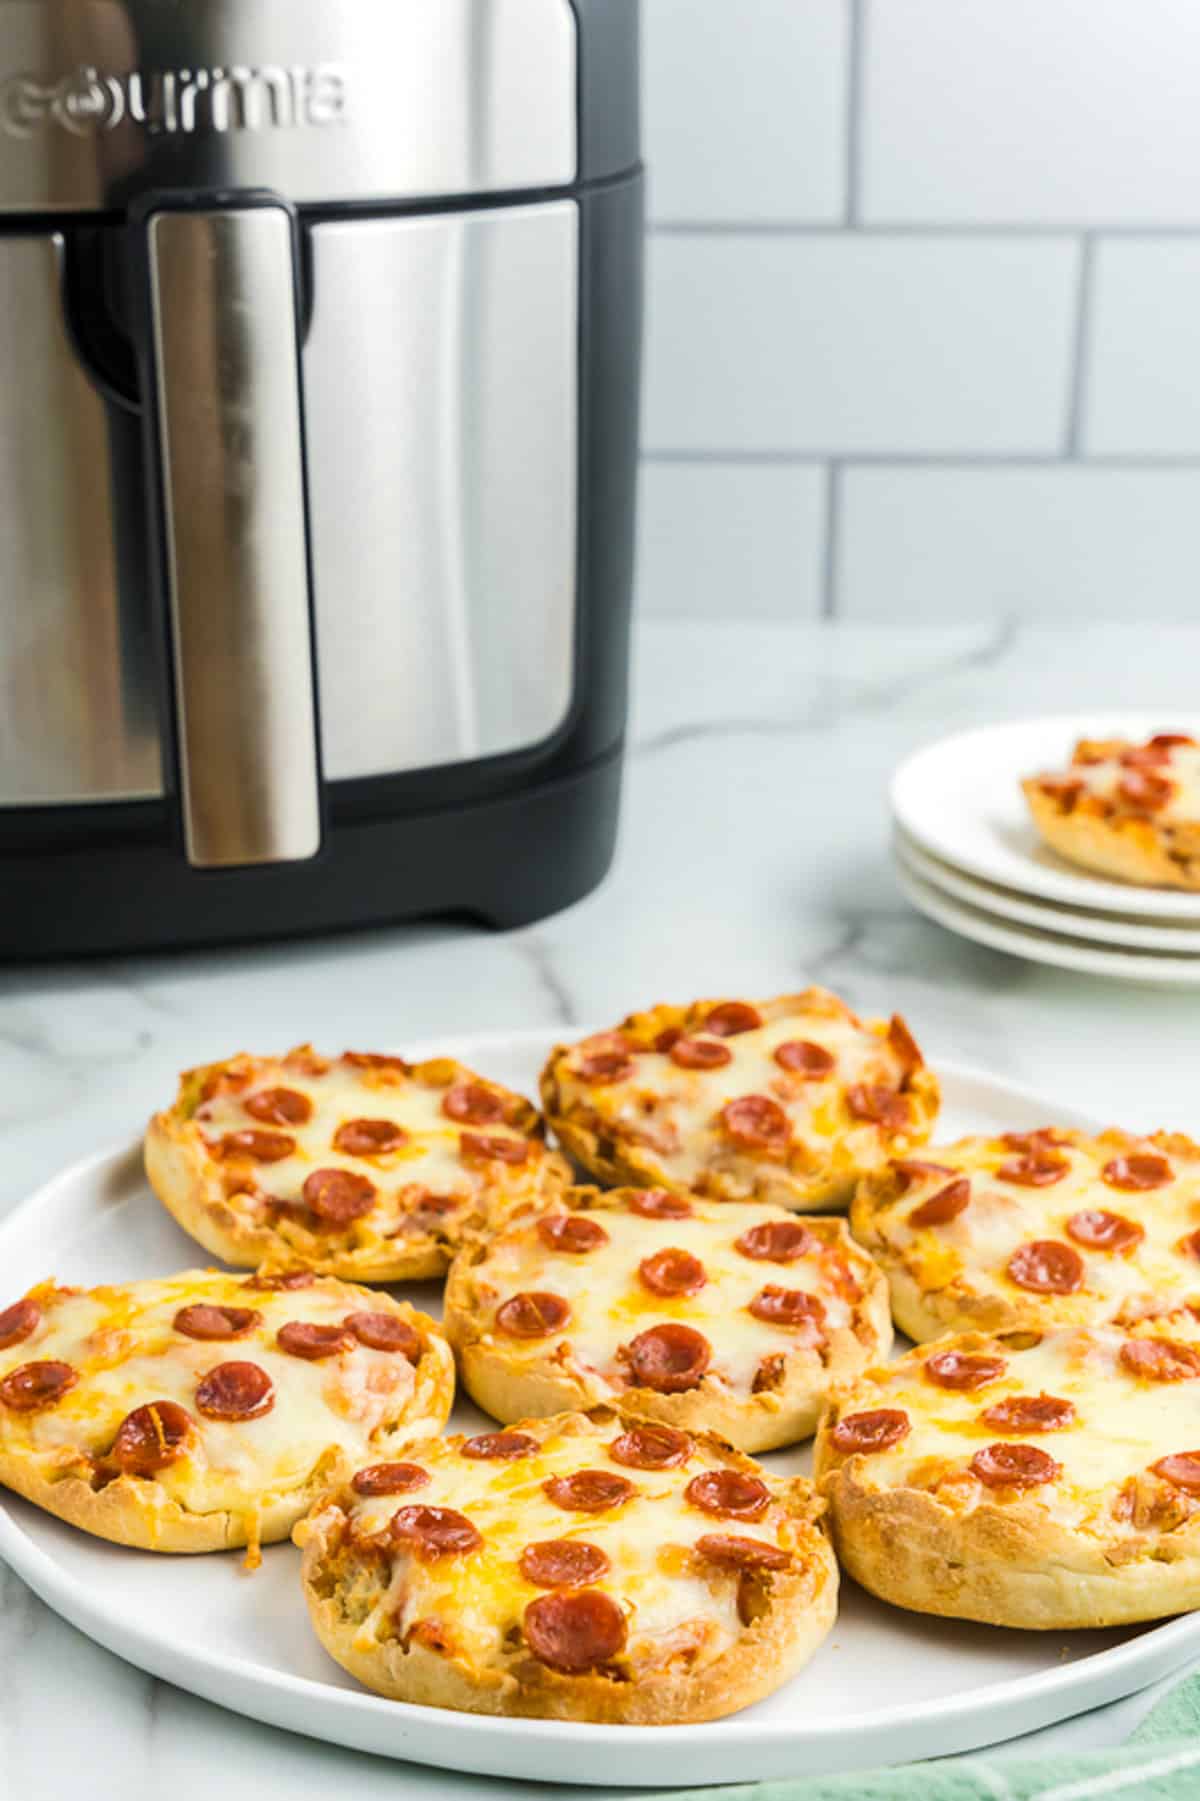 Plate with English Muffin Pizzas with Air Fryer in background